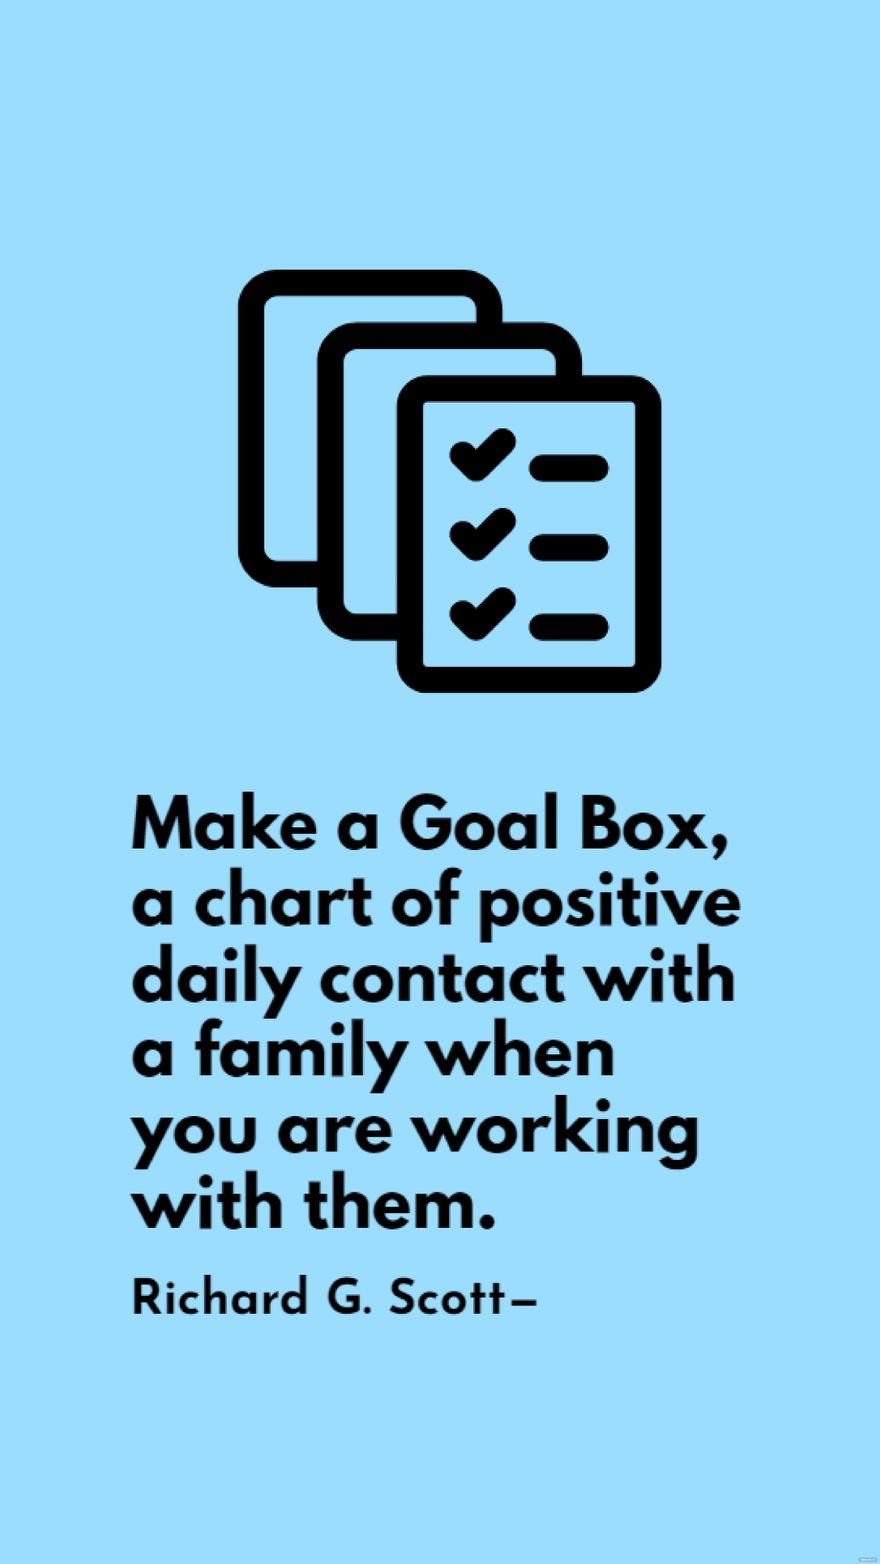 Richard G. Scott - Make a Goal Box, a chart of positive daily contact with a family when you are working with them. in JPG